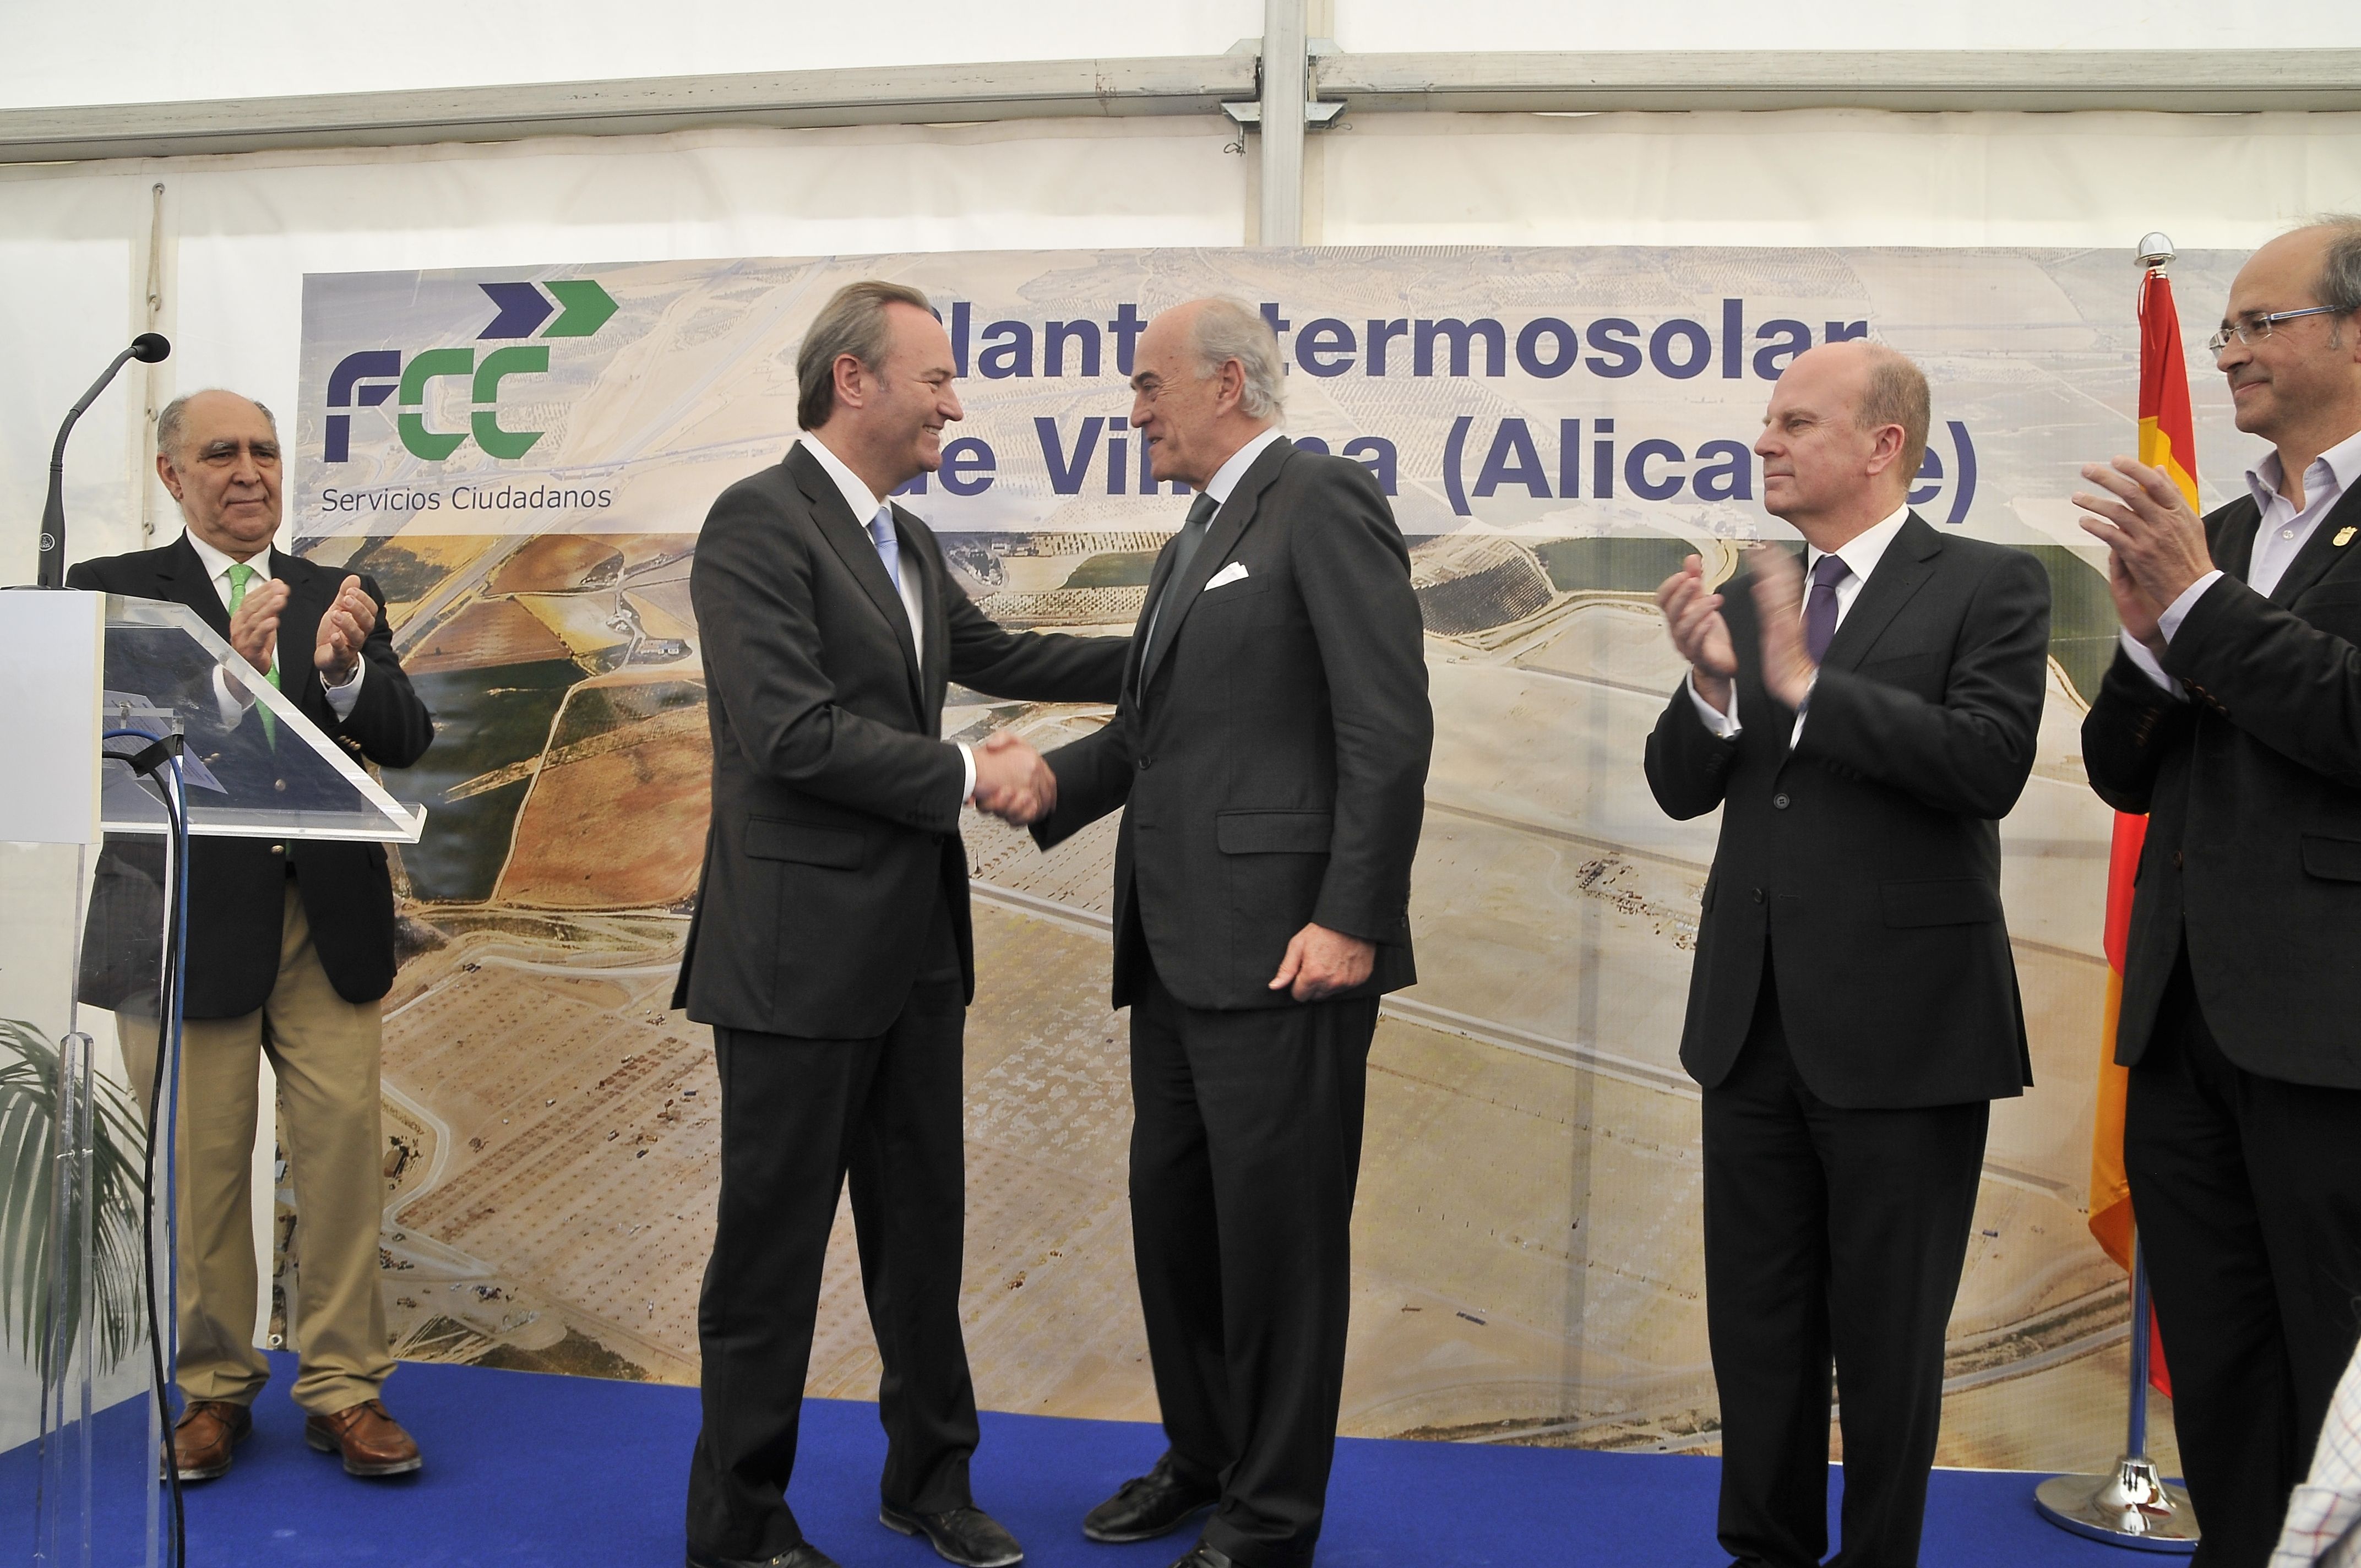 FCC commences construction of its solar thermal energy plant in Villena (Alicante), which will create over 750 jobs